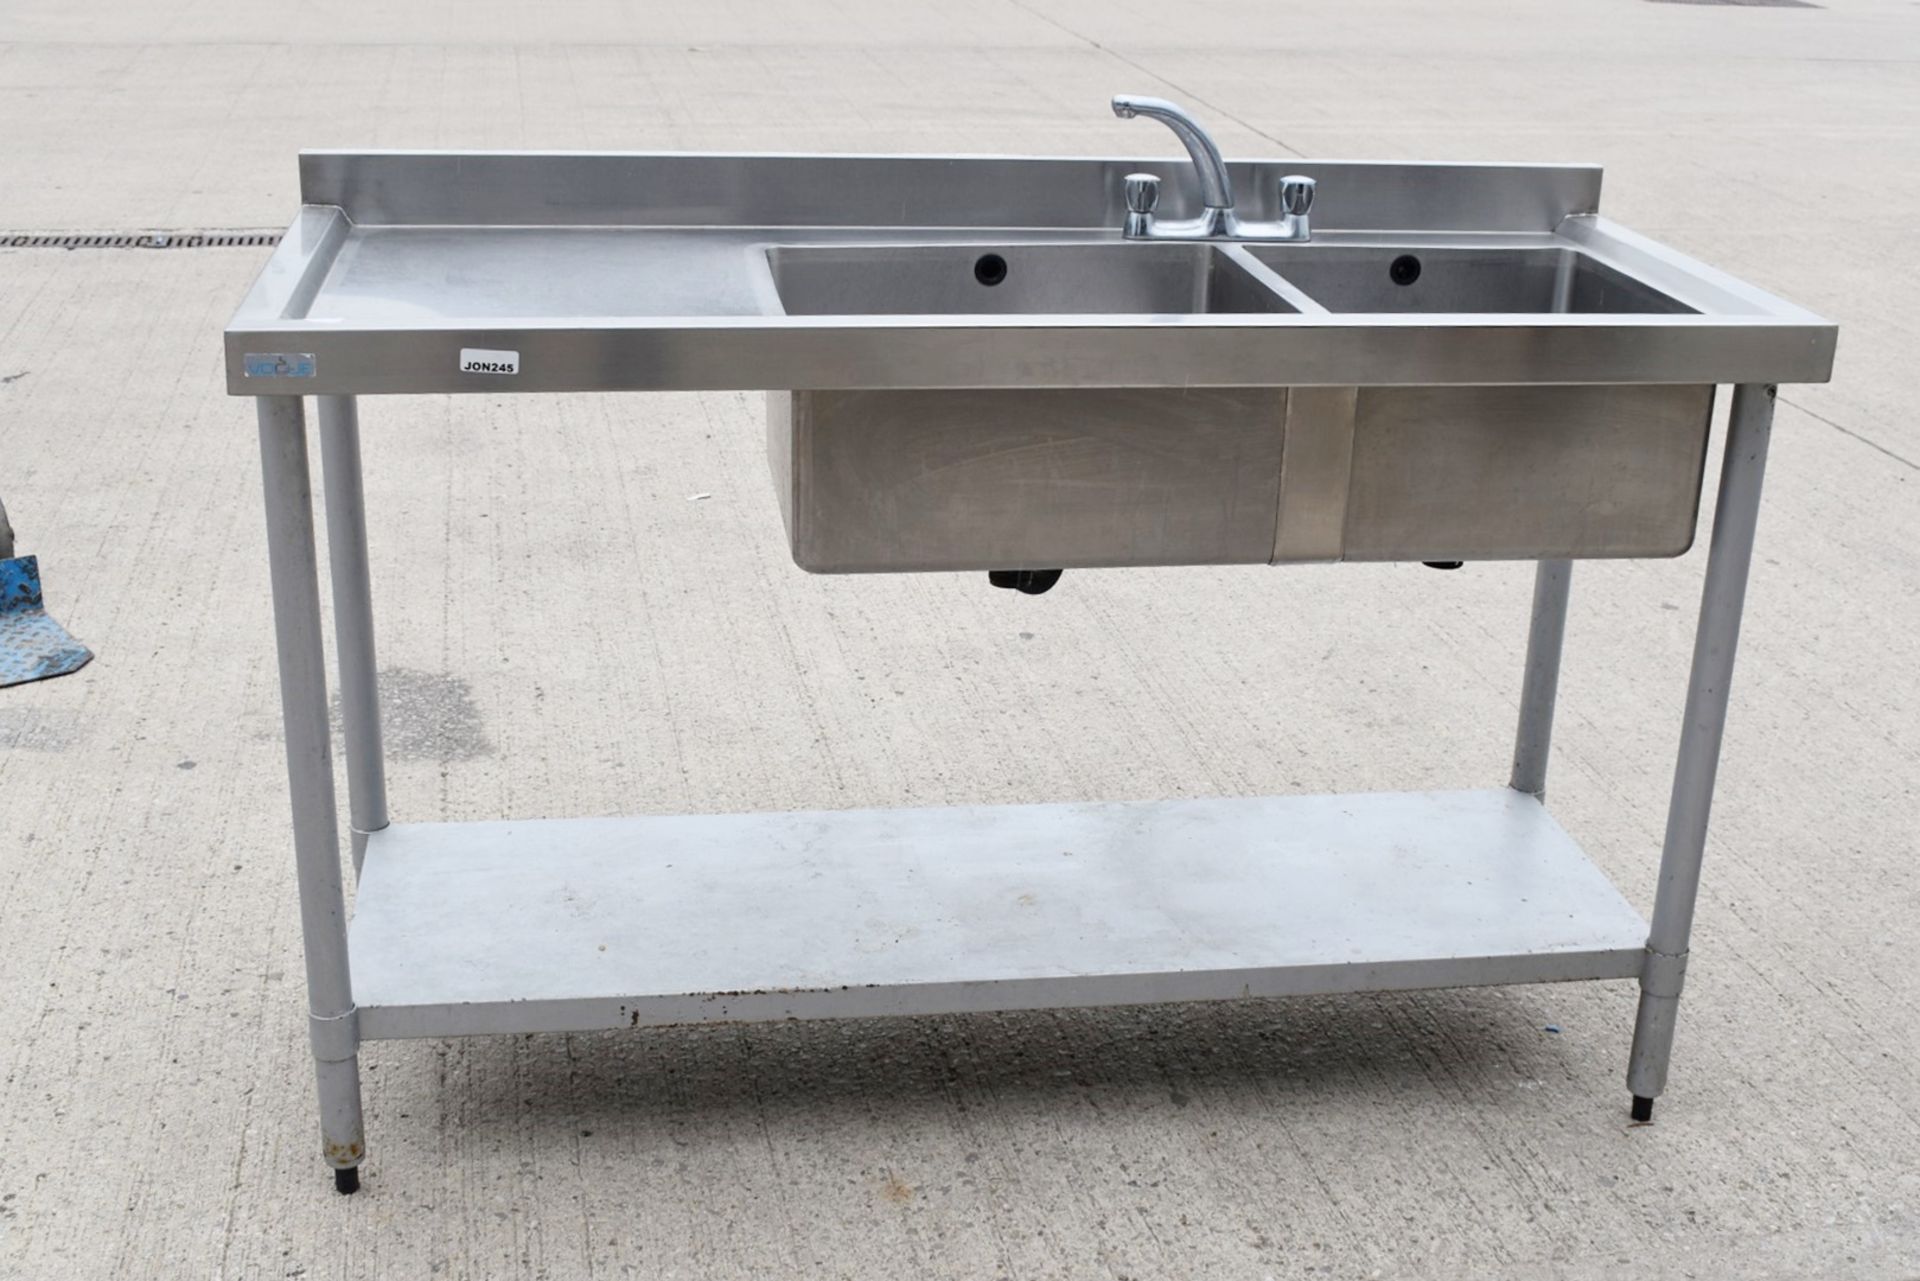 1 x Vogue Stainless Steel Twin Sink Wash Stand With Mixer Tap, Upstand & Undershelf - Image 4 of 11